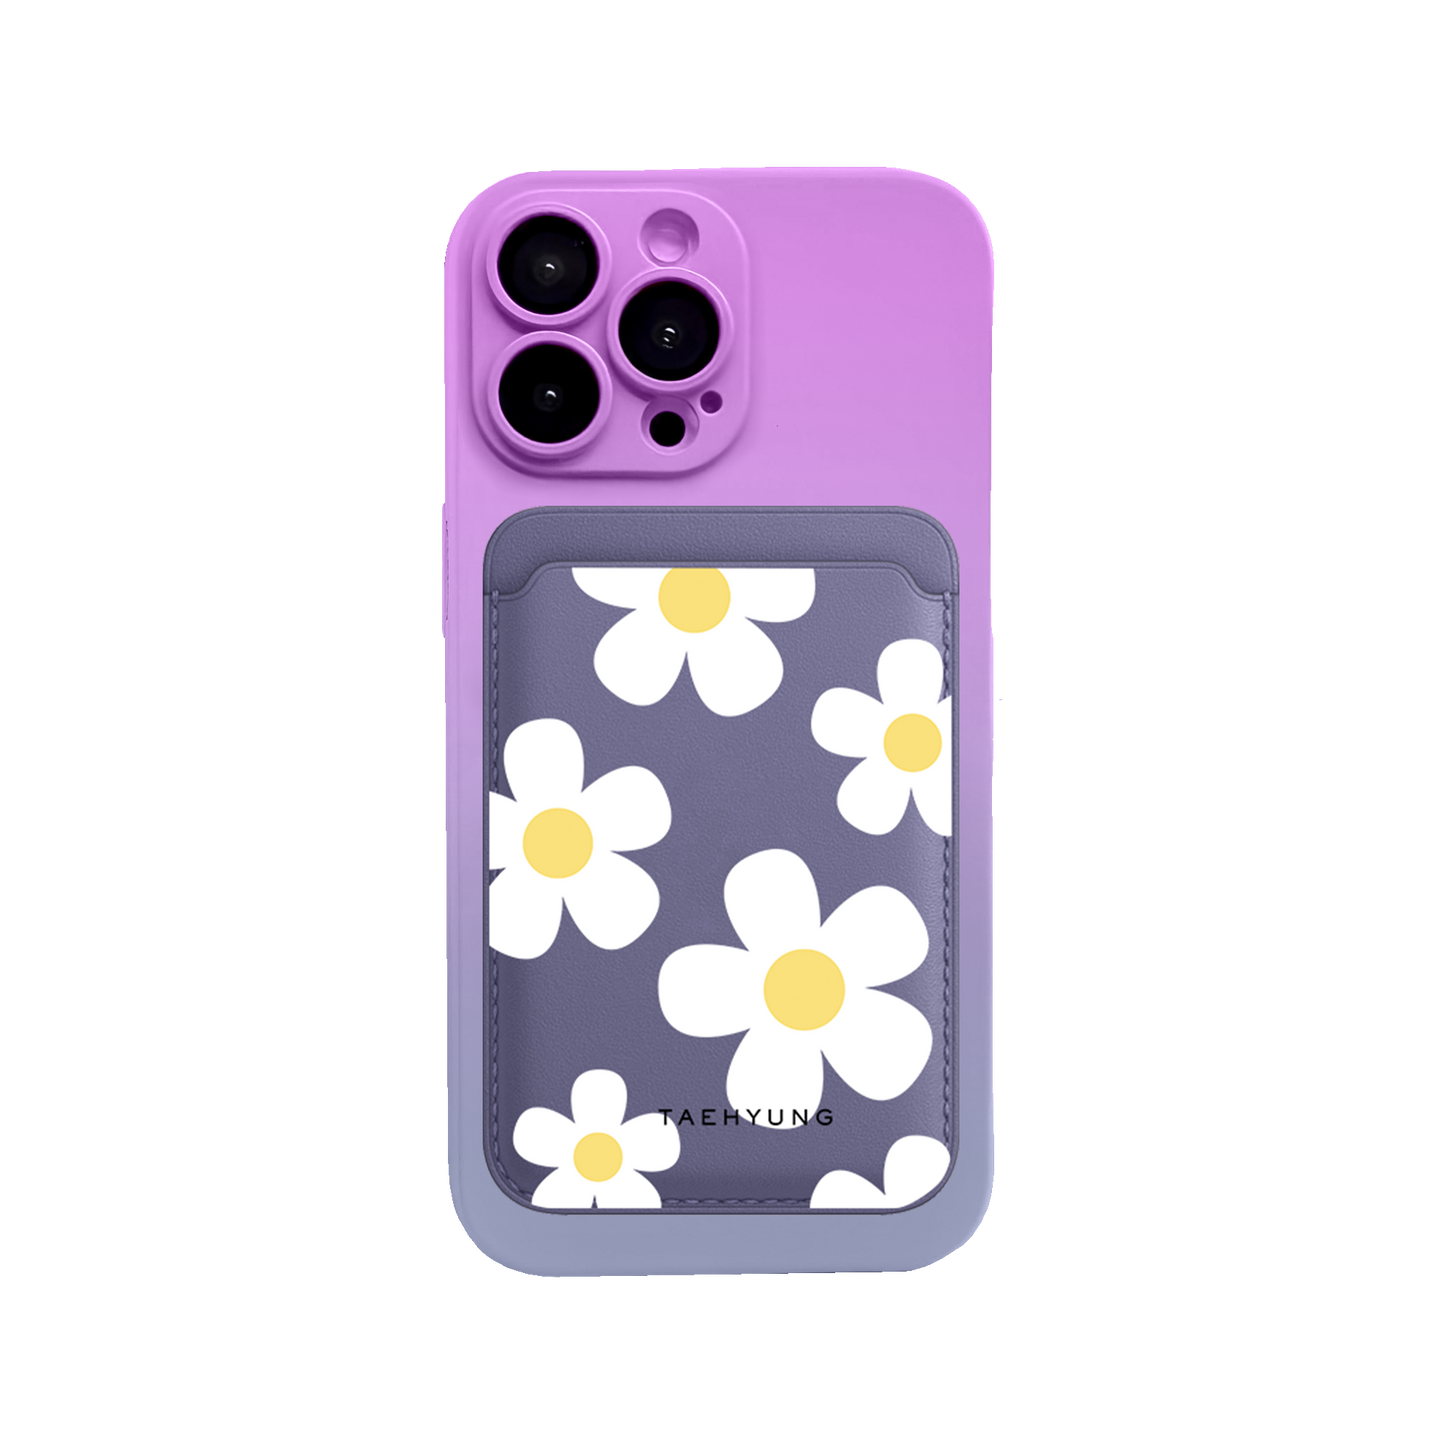 iPhone Magnetic Wallet Silicone Case - Daisy 2.0